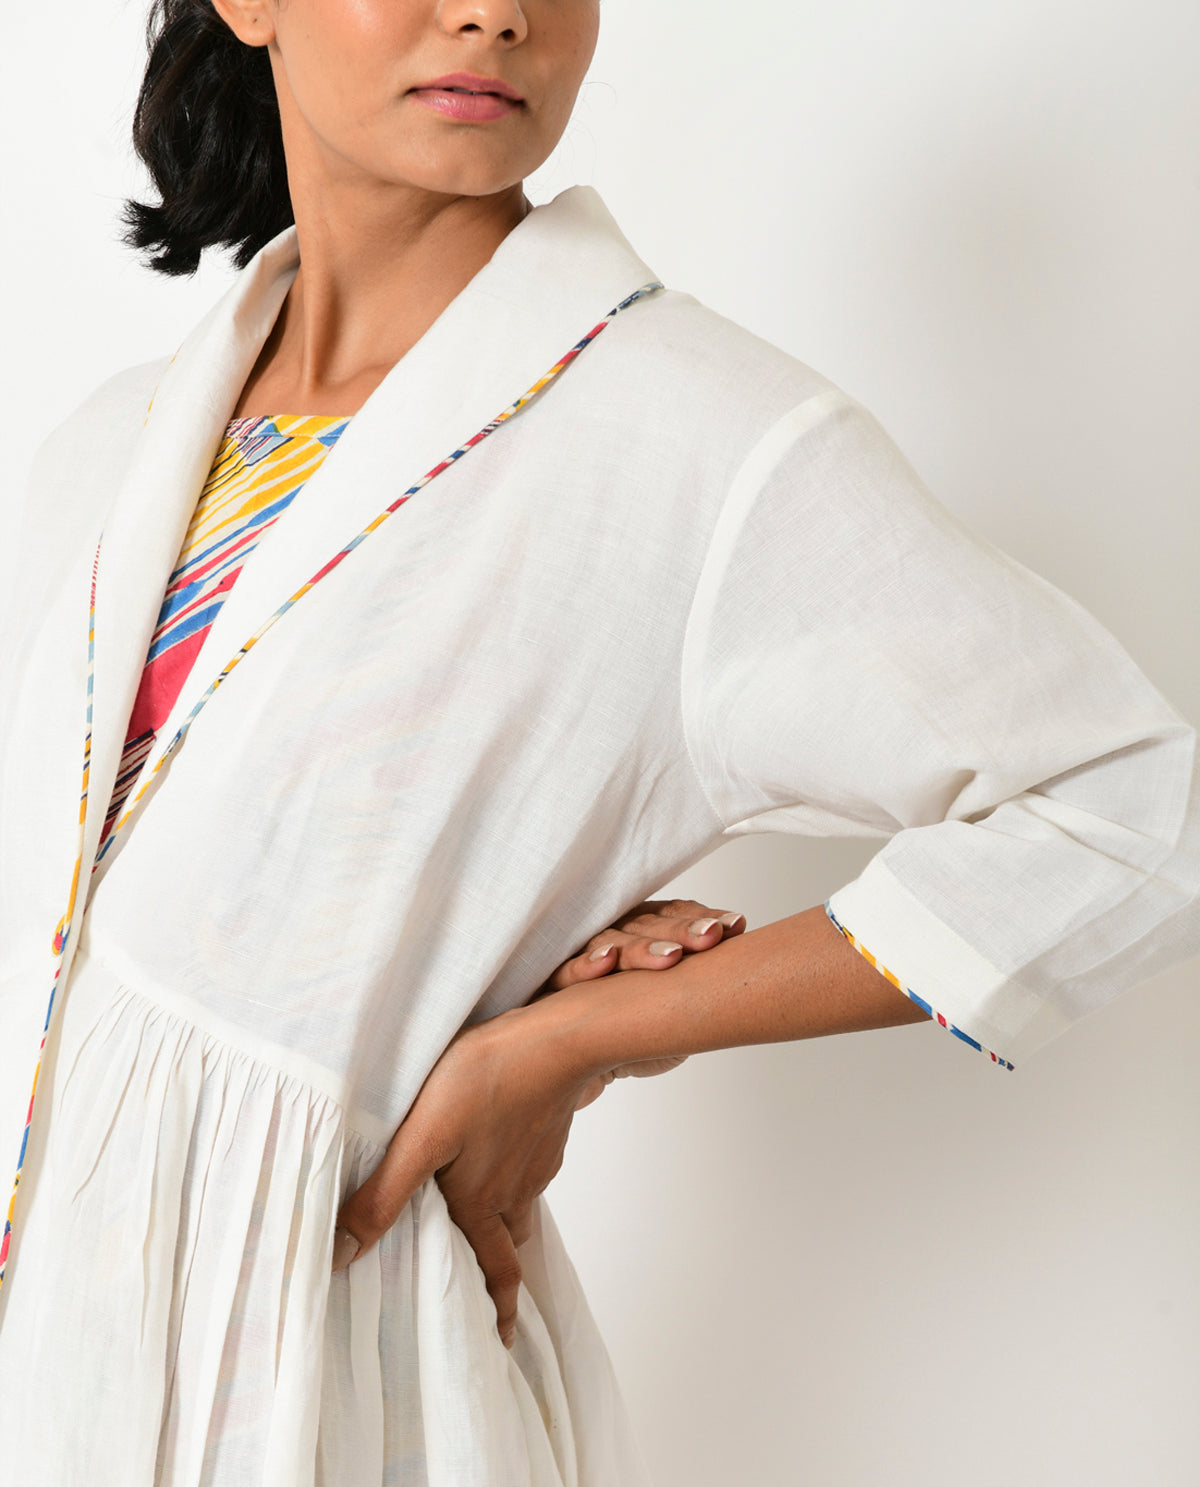 Off-White Linen Jacket at Kamakhyaa by Rias Jaipur. This item is Casual Wear, Jackets, Linen Blend, Natural, Relaxed Fit, Solids, White, Womenswear, Yaadein